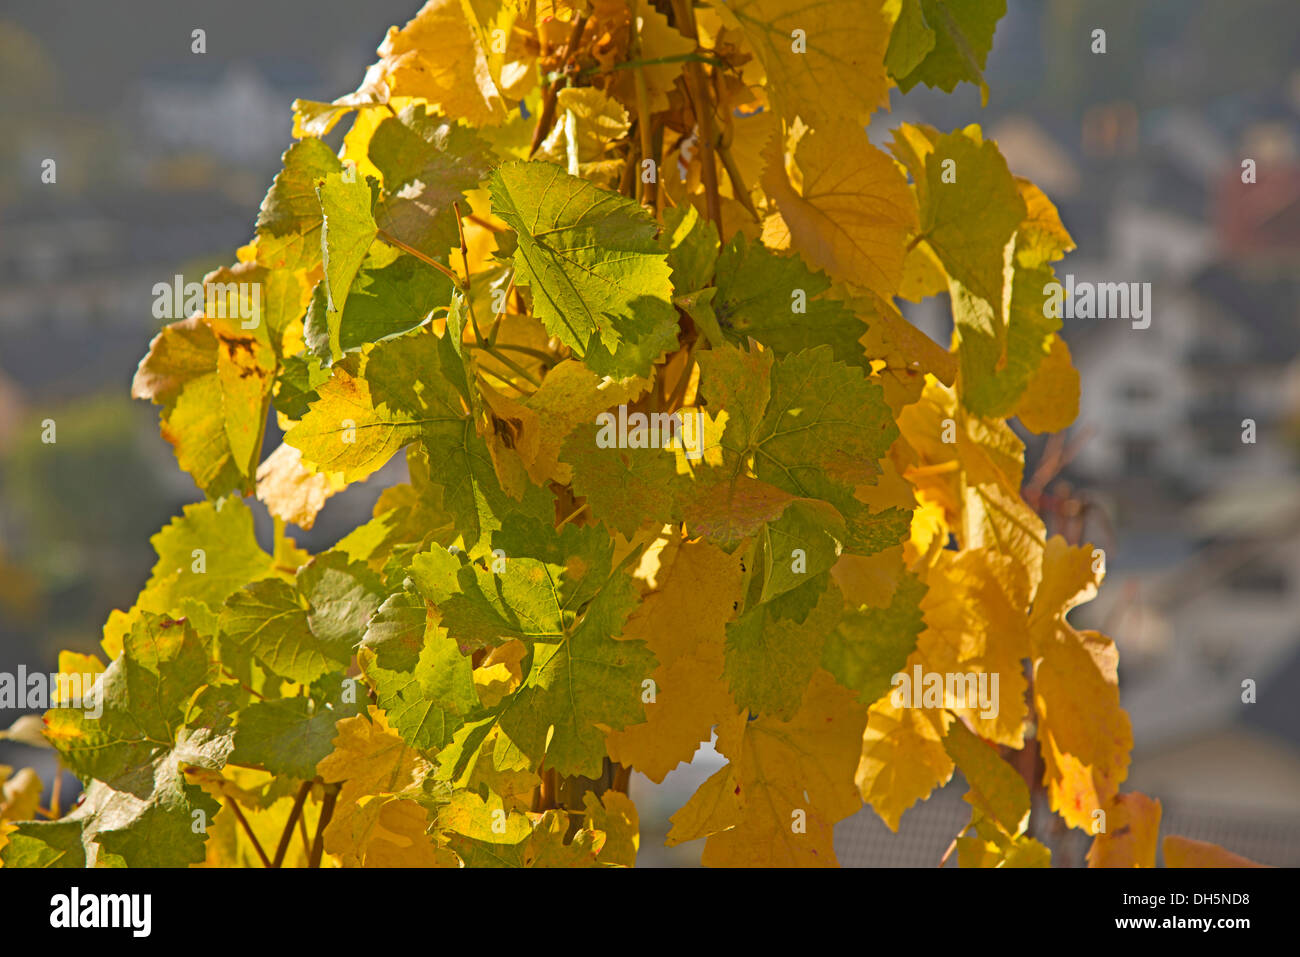 Autumn leaves in a vineyard, wine-growing area where Pinot Noir and Blue Portuguese grapes are commonly grown Stock Photo